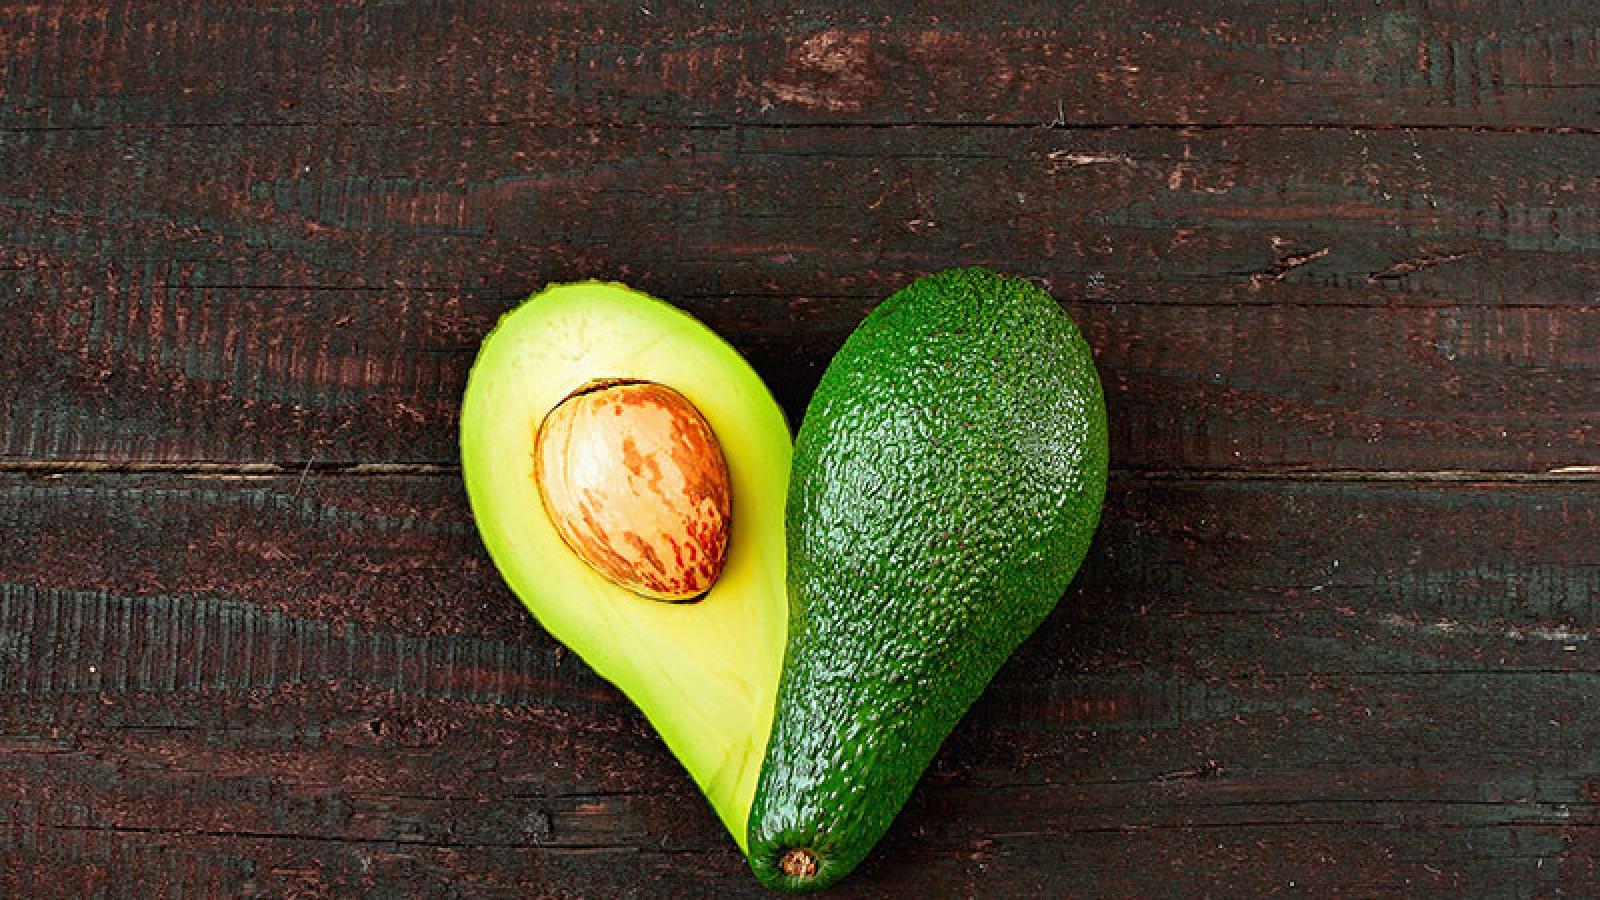 Are Avocados Good for Your Heart?